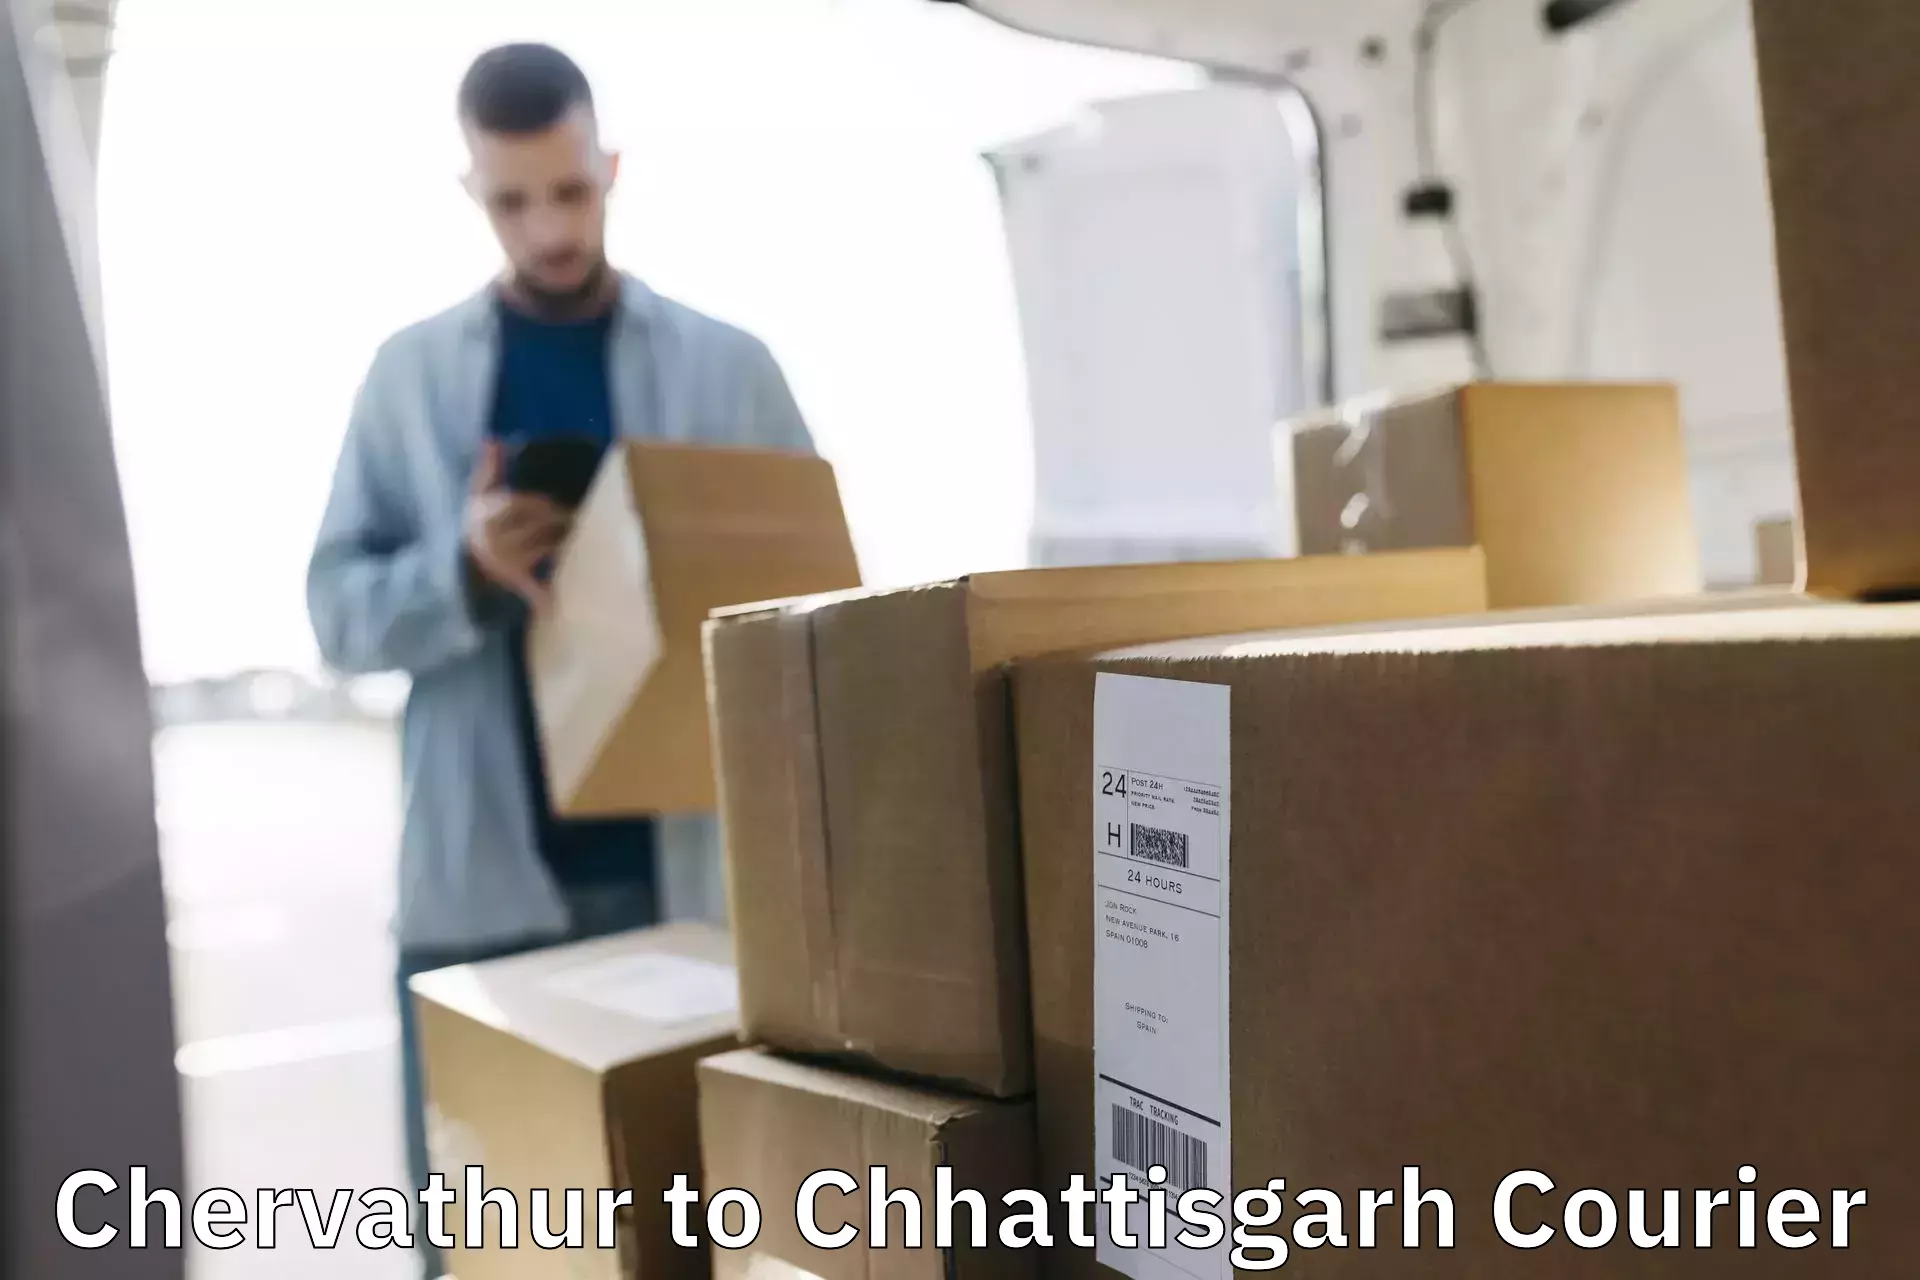 Express delivery solutions Chervathur to Nagri